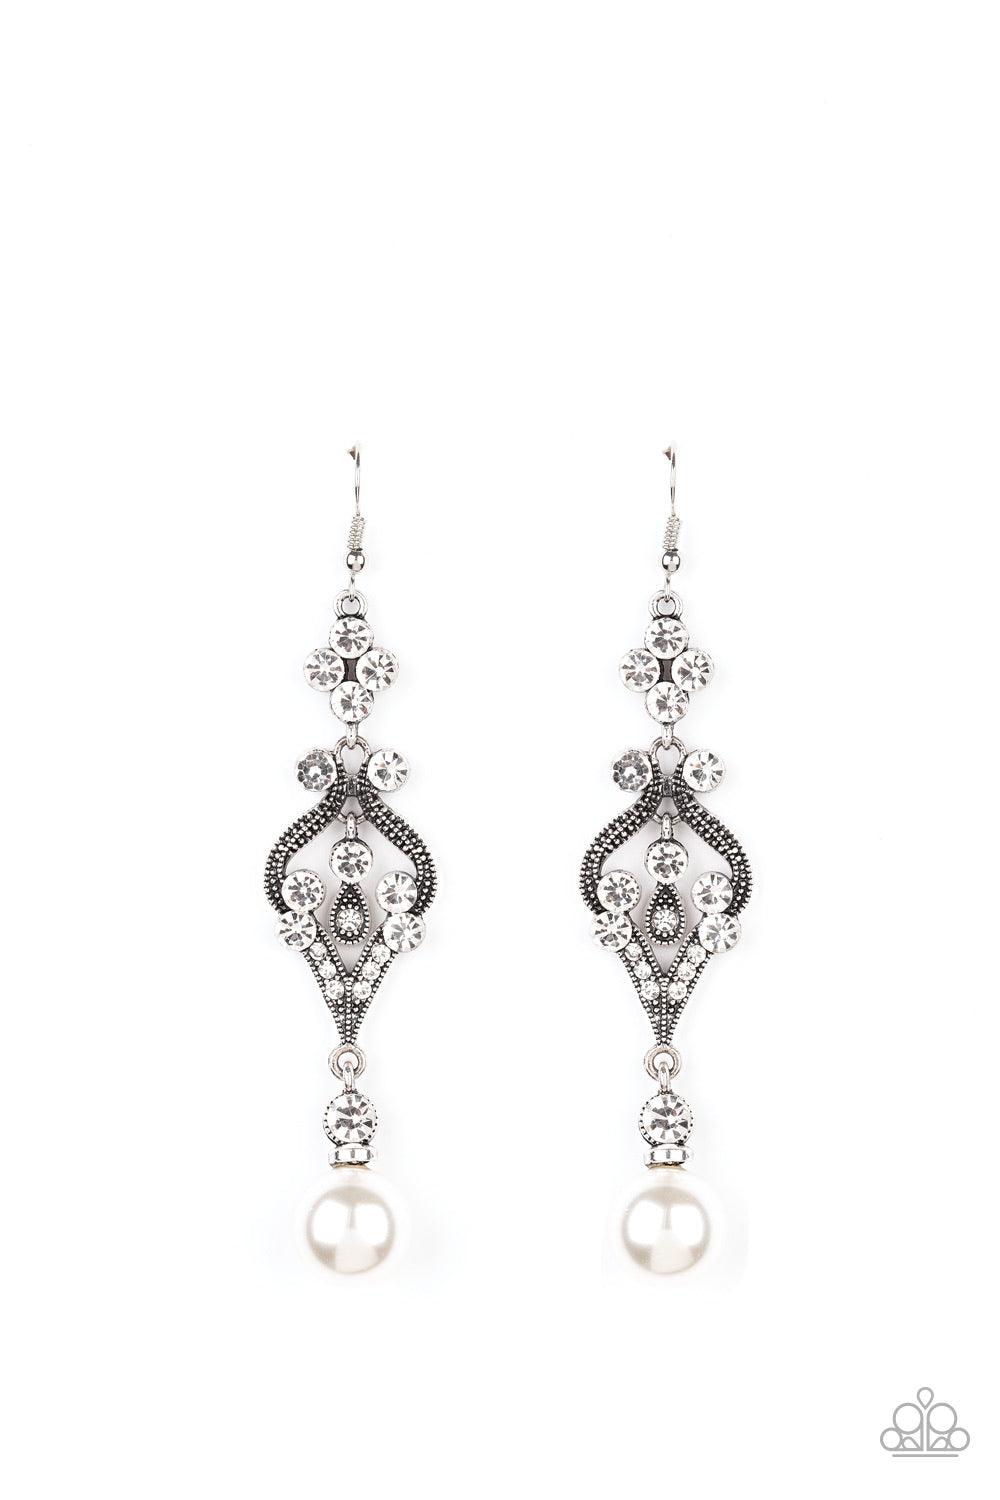 Paparazzi Accessories Elegantly Extravagant - White An oversized white pearl dangles from the bottom of a flowery silver frame dotted in sections of glassy white rhinestones for an elegant look. Earring attaches to a standard fishhook fitting. Jewelry